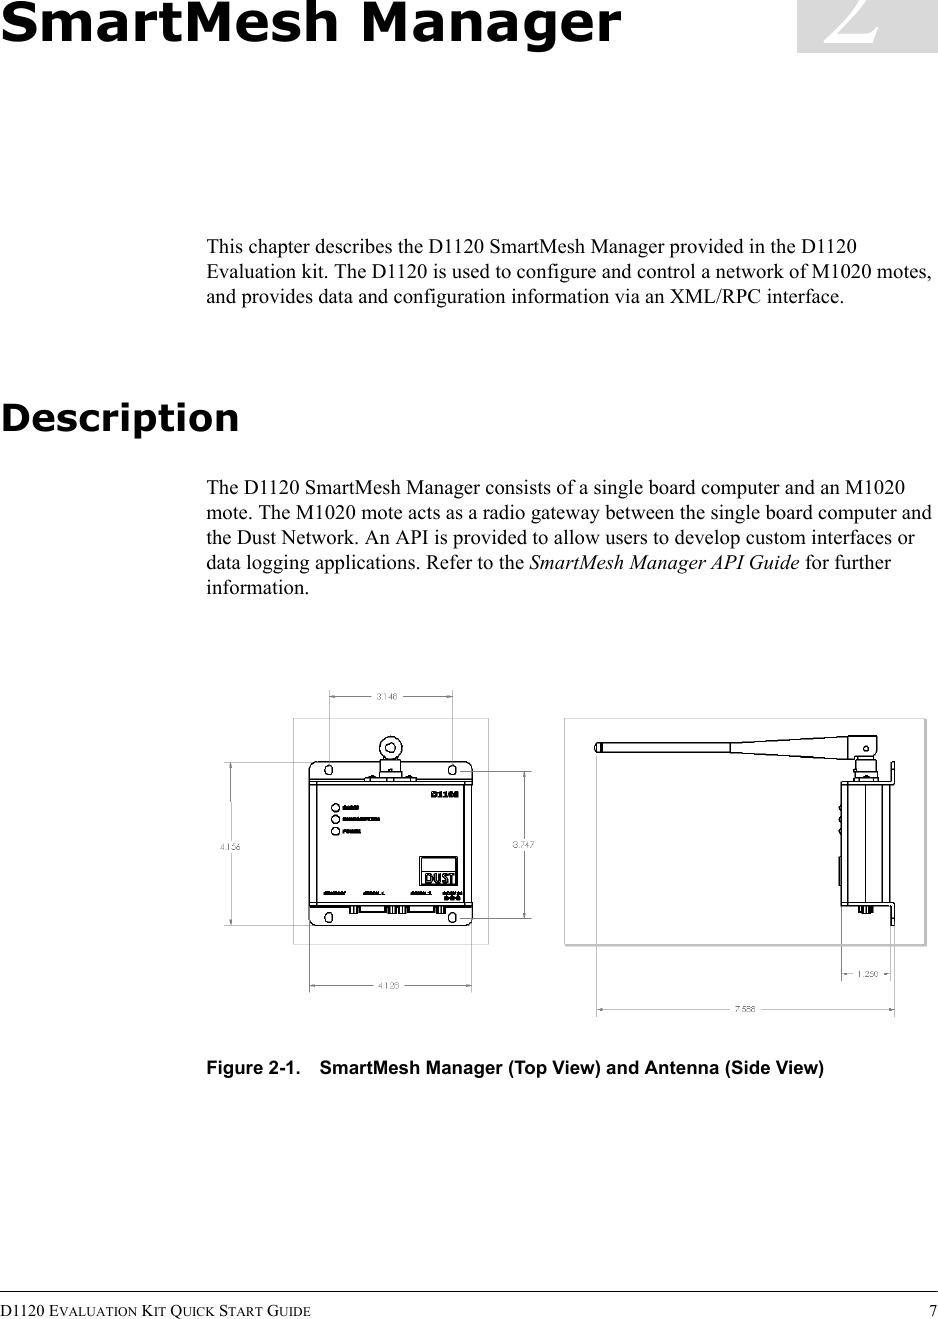 D1120 EVALUATION KIT QUICK START GUIDE 72SmartMesh ManagerThis chapter describes the D1120 SmartMesh Manager provided in the D1120 Evaluation kit. The D1120 is used to configure and control a network of M1020 motes, and provides data and configuration information via an XML/RPC interface.DescriptionThe D1120 SmartMesh Manager consists of a single board computer and an M1020 mote. The M1020 mote acts as a radio gateway between the single board computer and the Dust Network. An API is provided to allow users to develop custom interfaces or data logging applications. Refer to the SmartMesh Manager API Guide for further information.Figure 2-1. SmartMesh Manager (Top View) and Antenna (Side View)